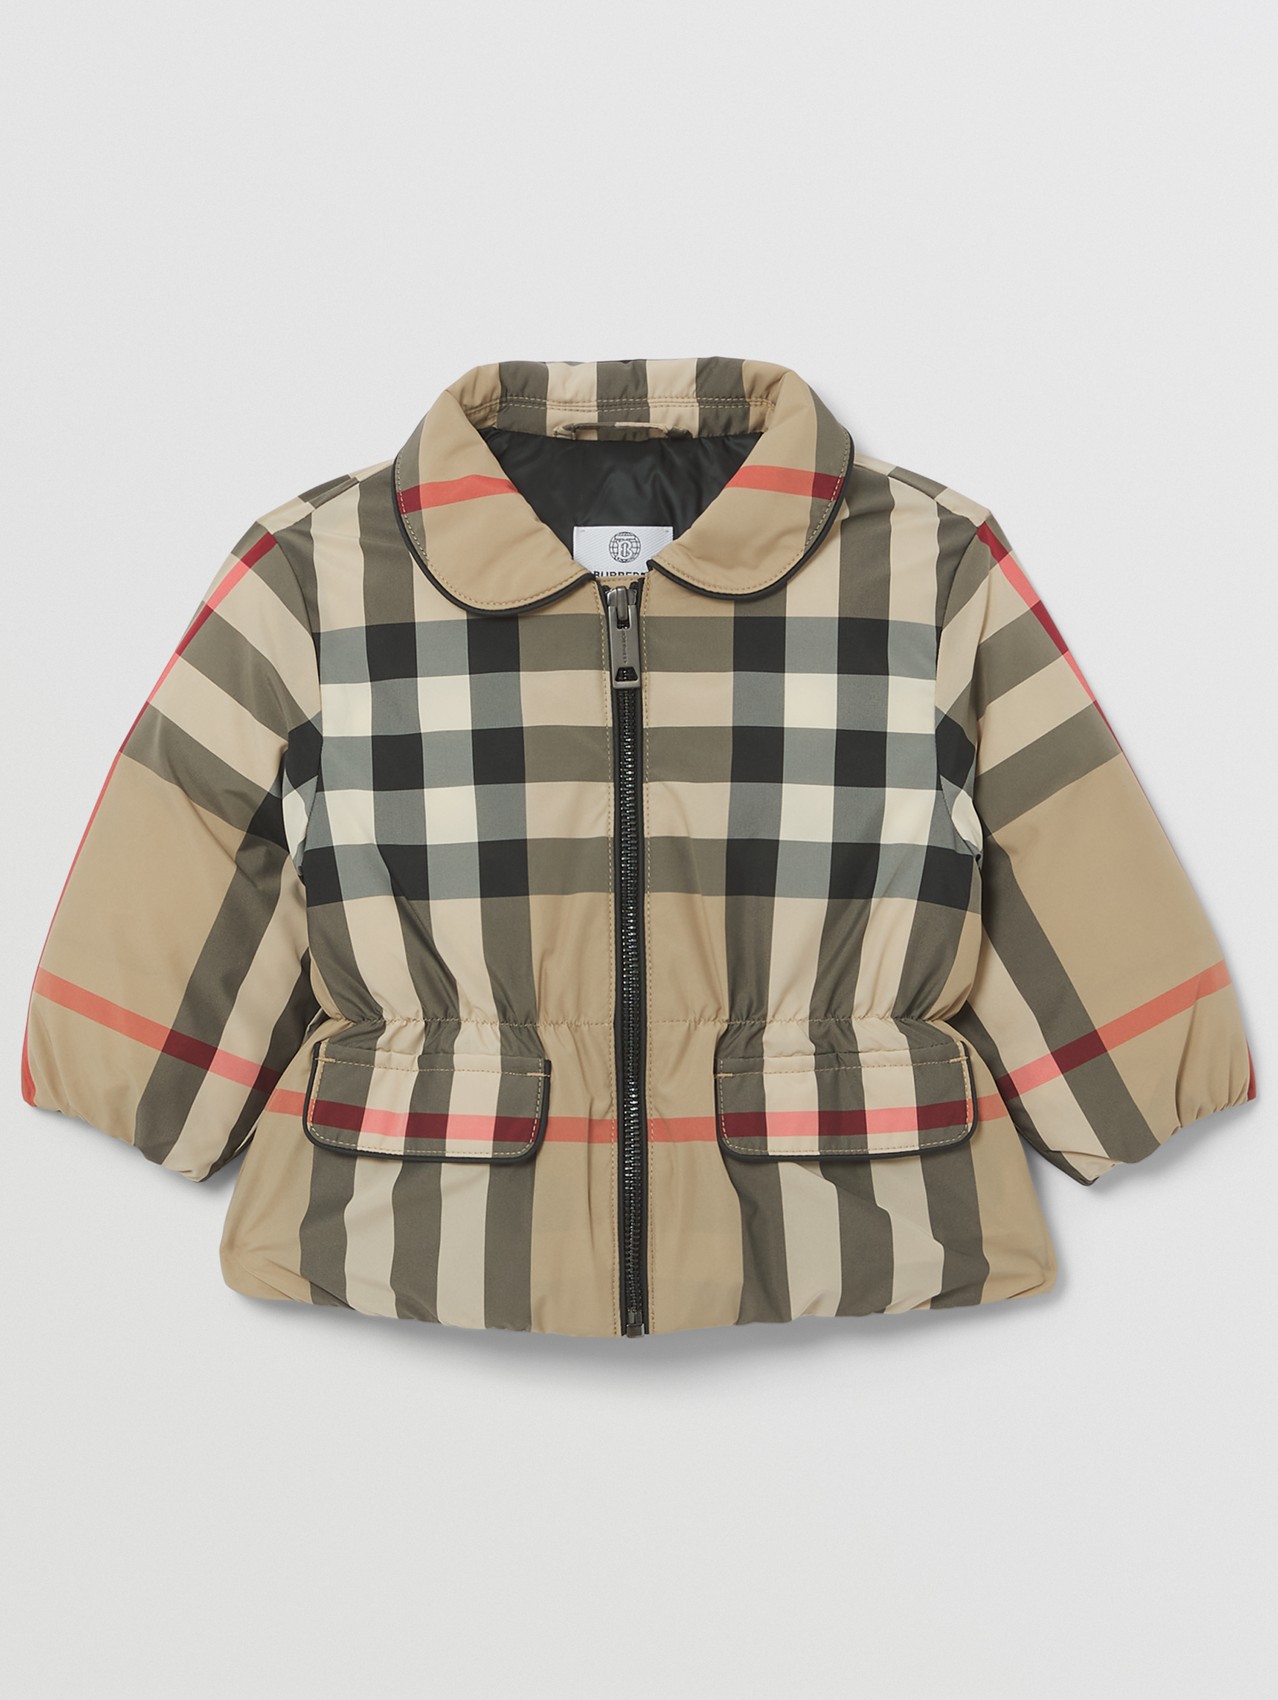 Down-filled Check Jacket in Archive Beige